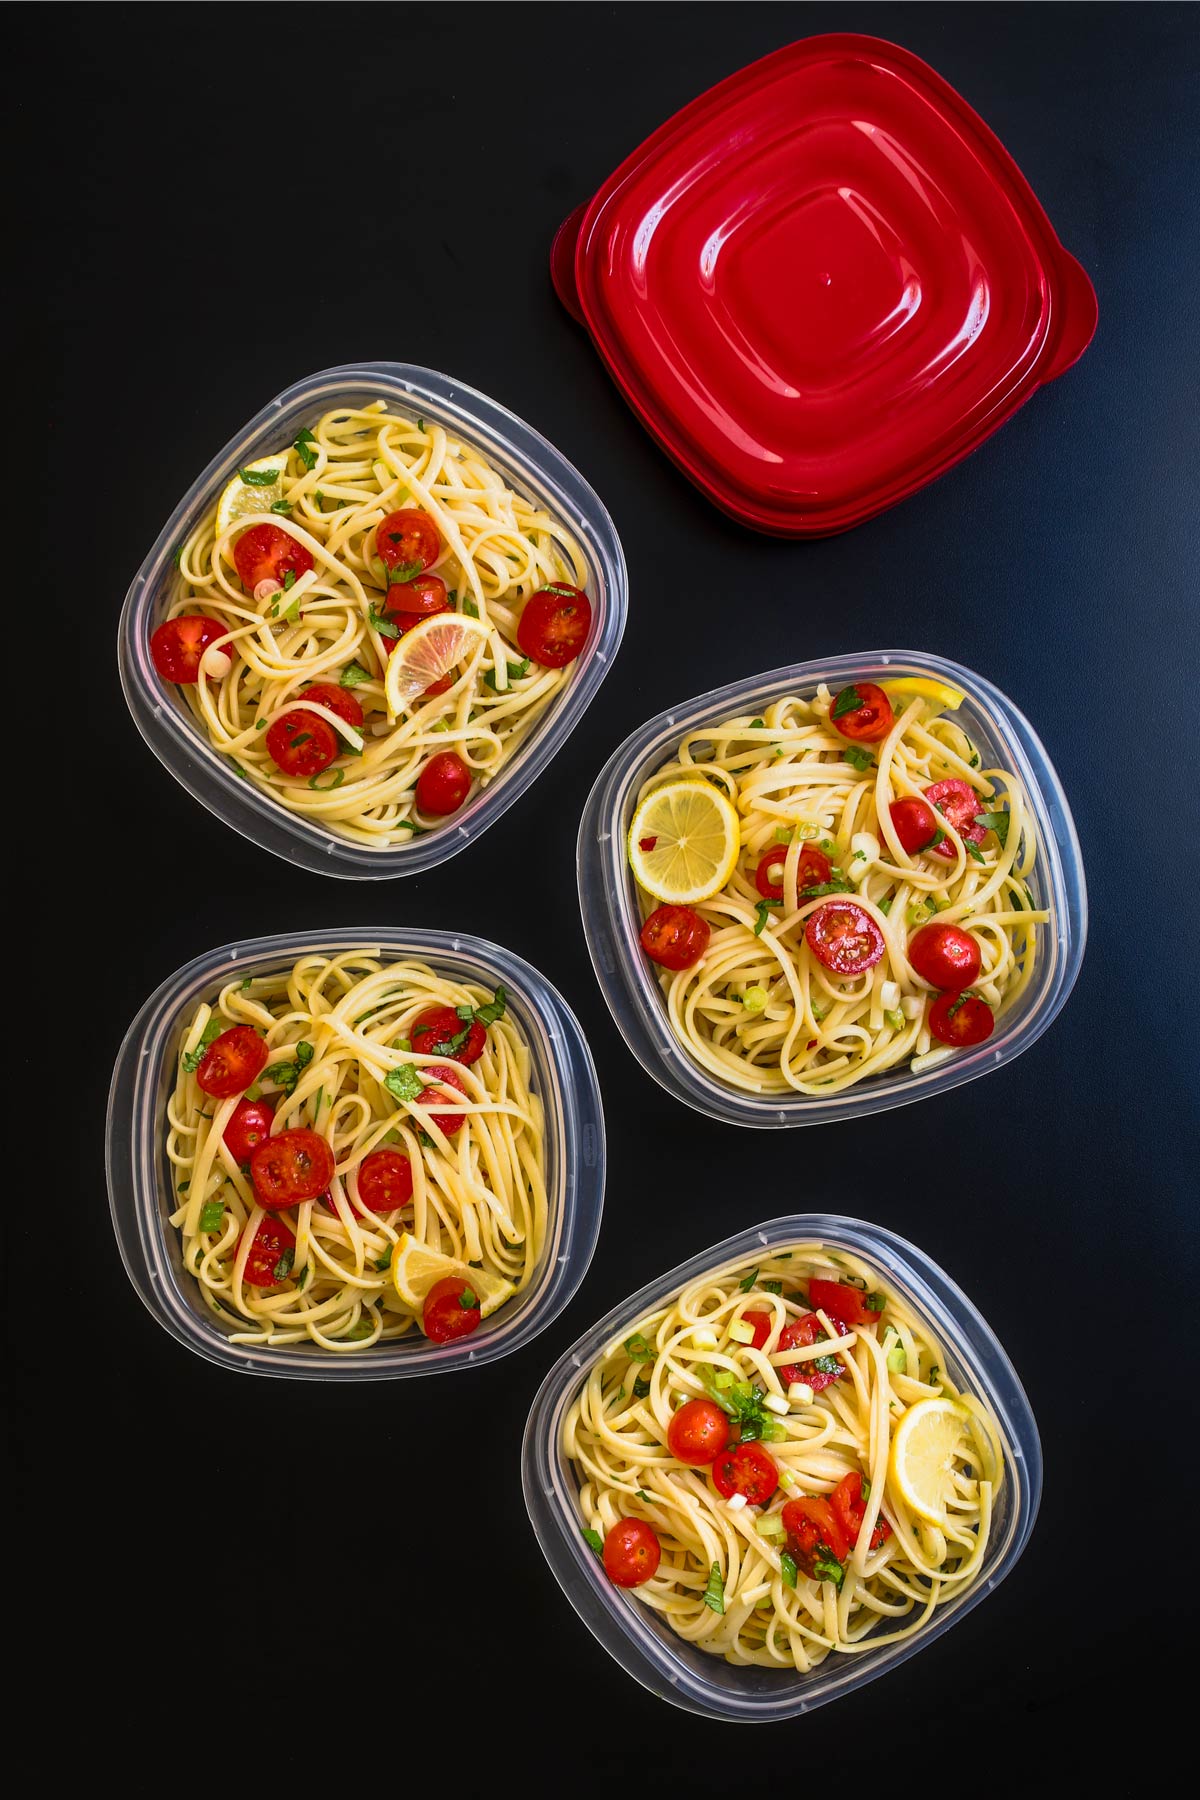 pasta with lemon divided into meal prep dishes with red lids on black tabletop.